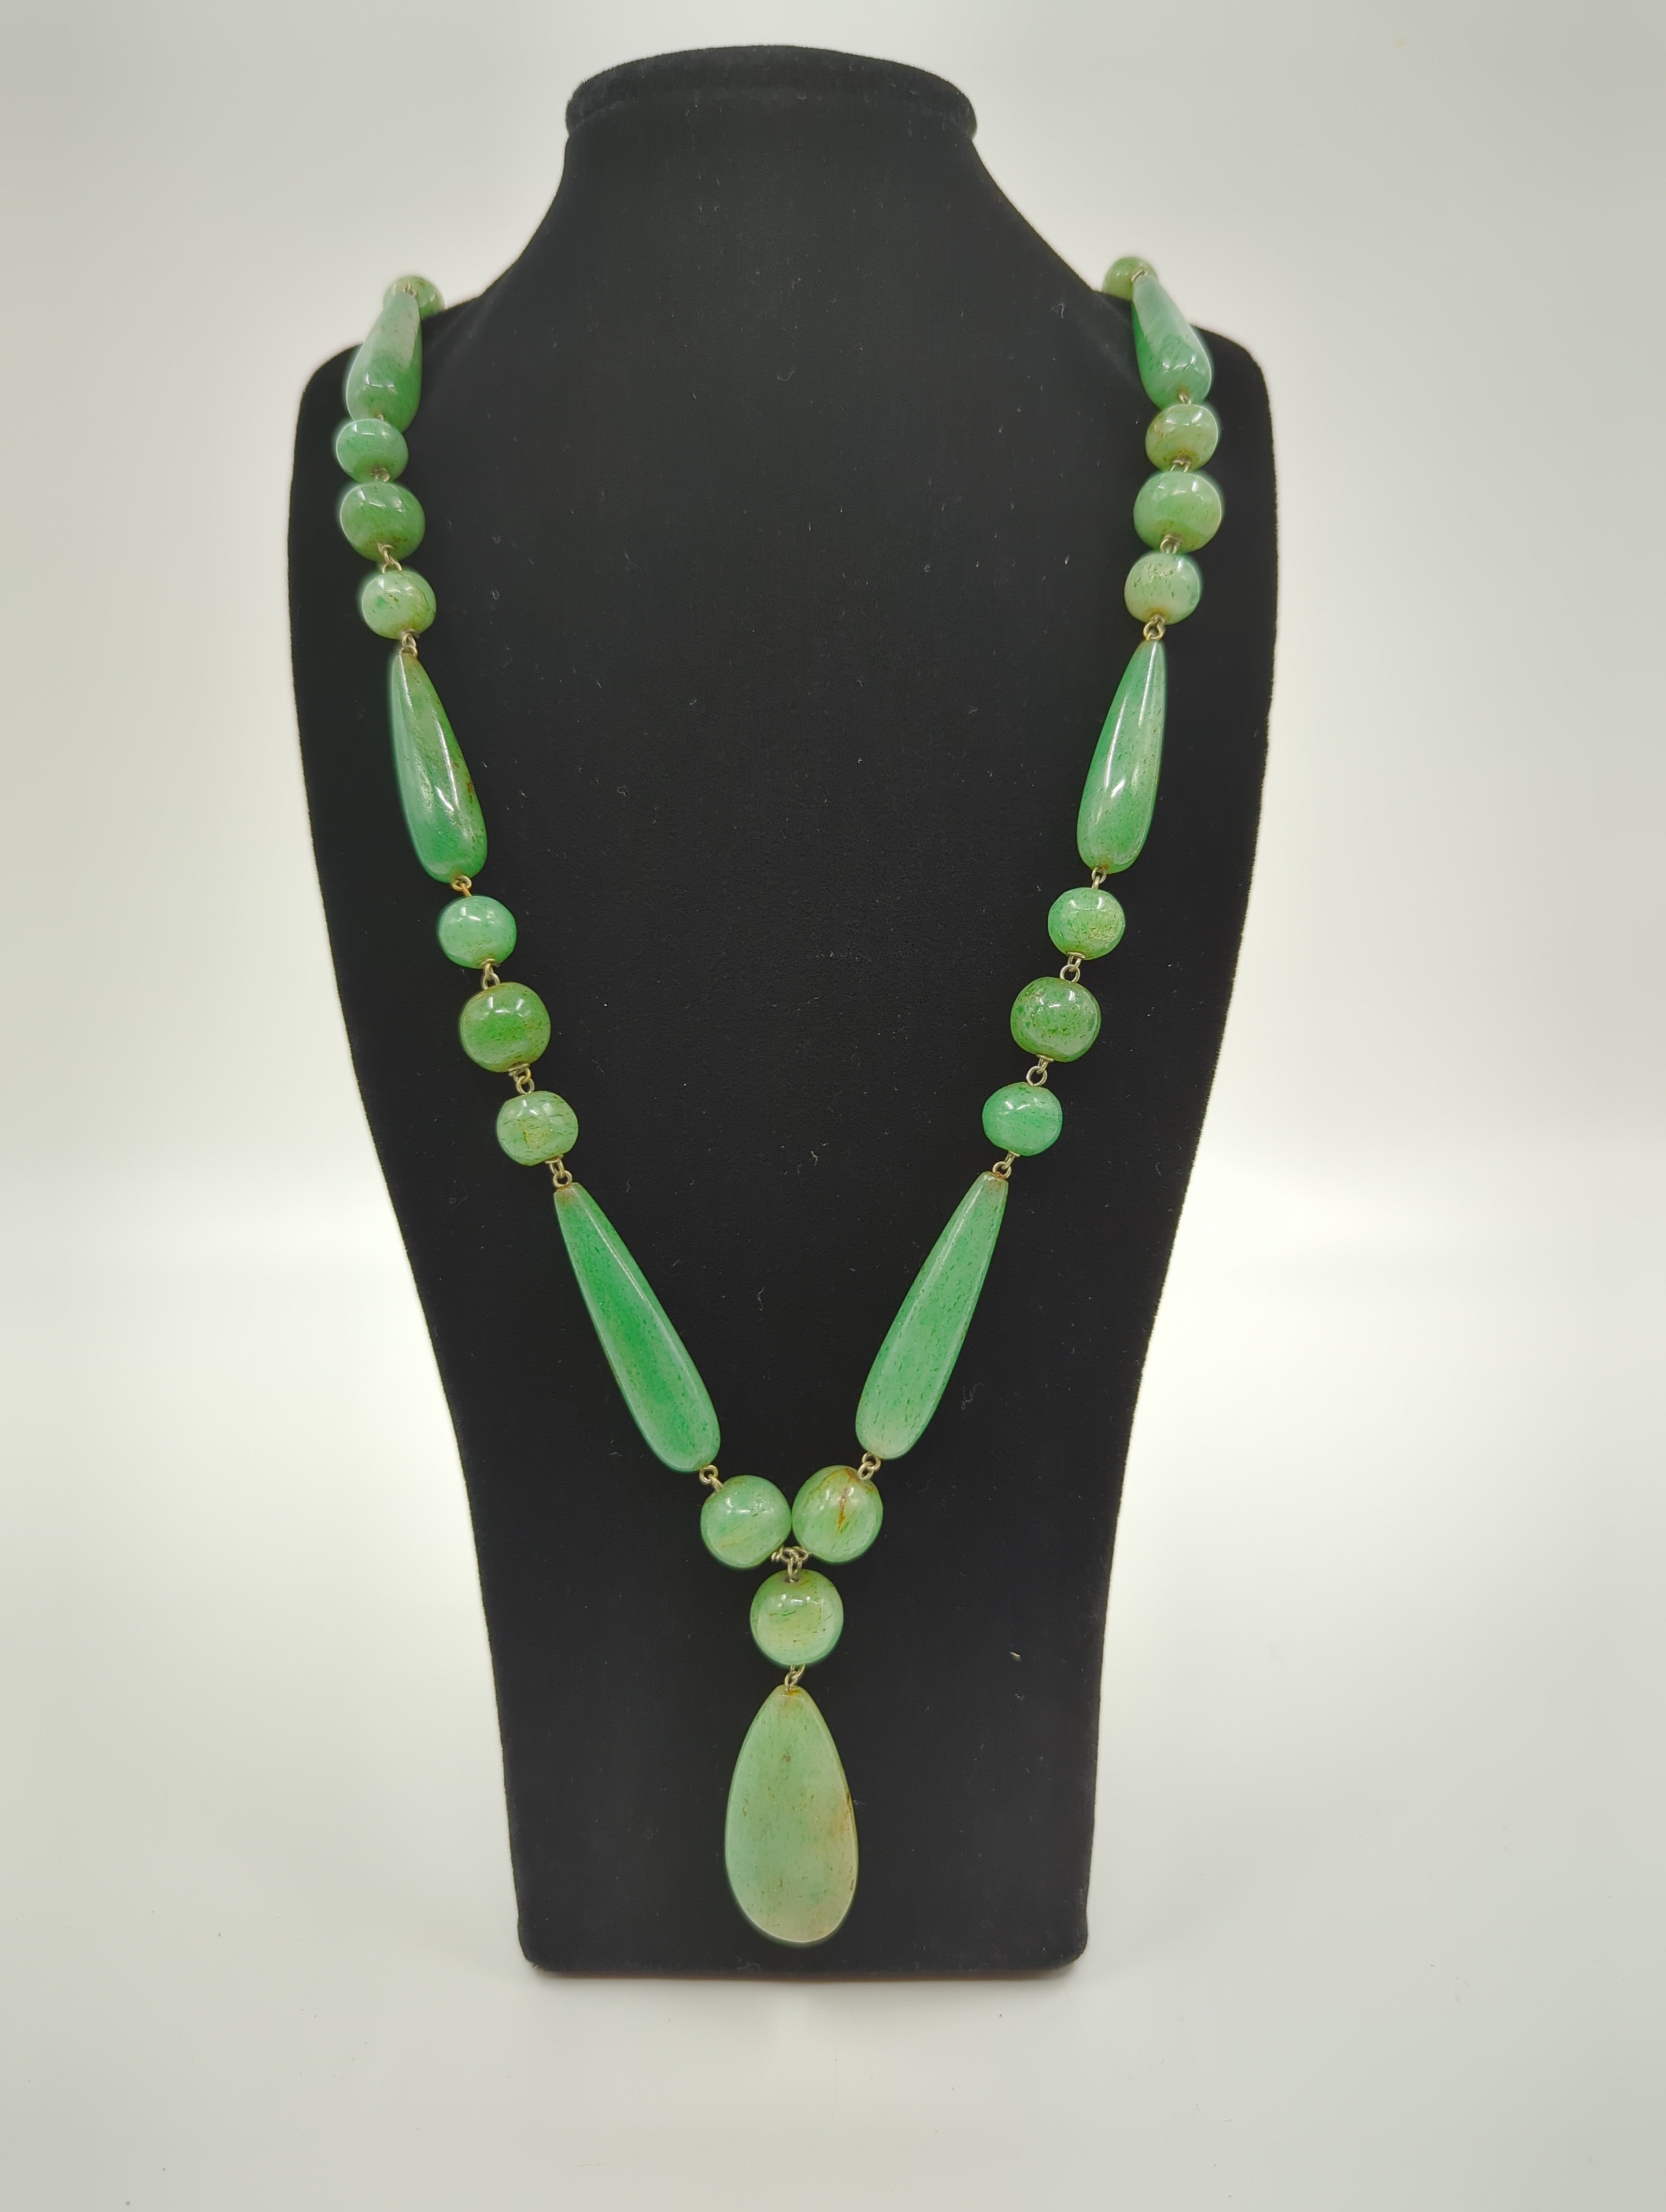 This late 19c carved green nephrite jade pendant and beads necklace, with a total length of 32 inches, makes a versatile and sophisticated accessory. The beads are strung together on delicate yet strong silver wires.

The clarity, size and